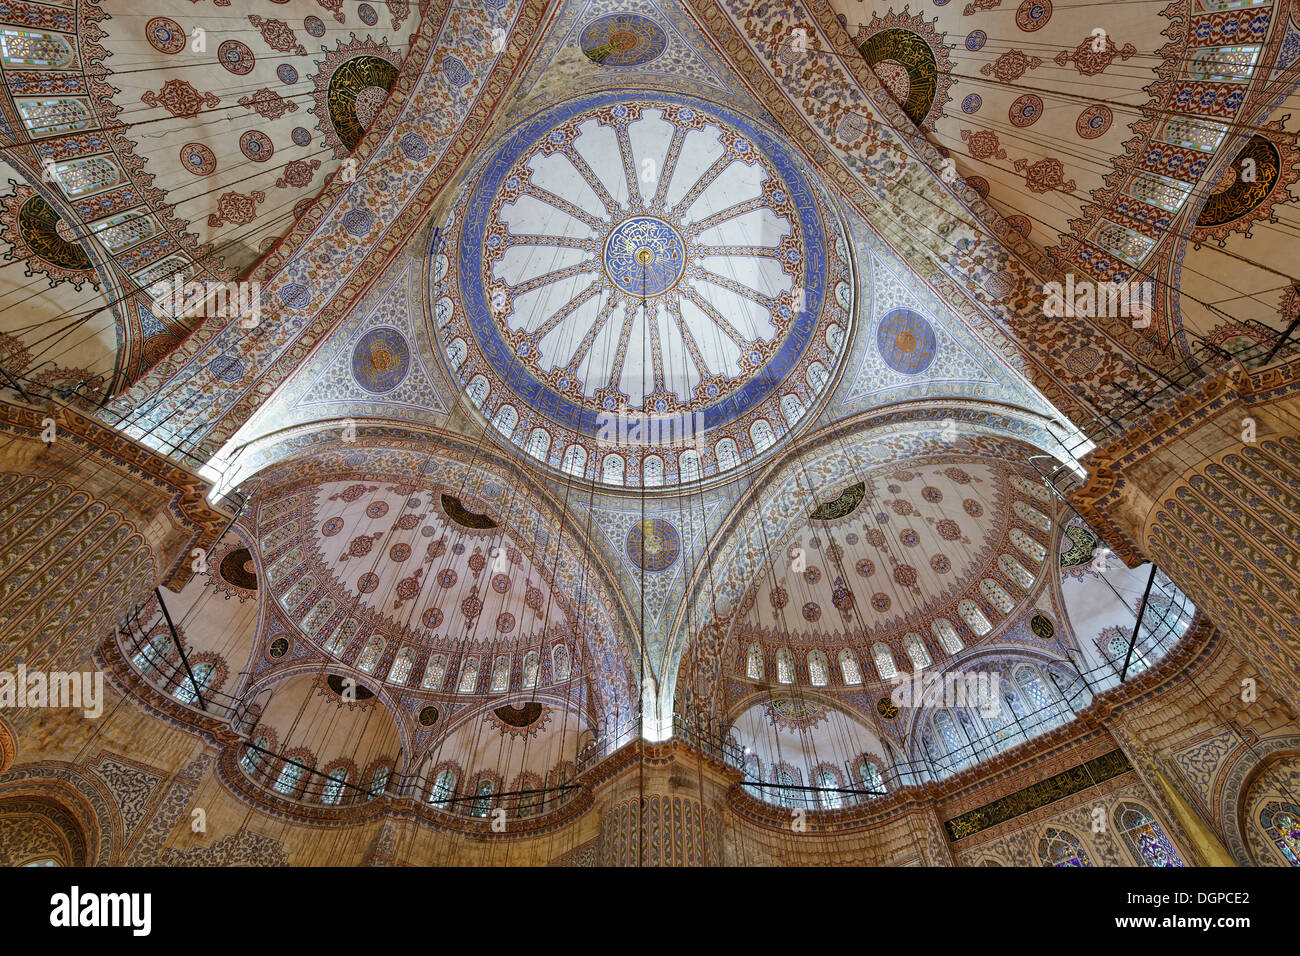 Main dome of the Blue Mosque, Sultan Ahmed Mosque or Sultanahmet Camii, Istanbul, european side, Turkey, Europe Stock Photo